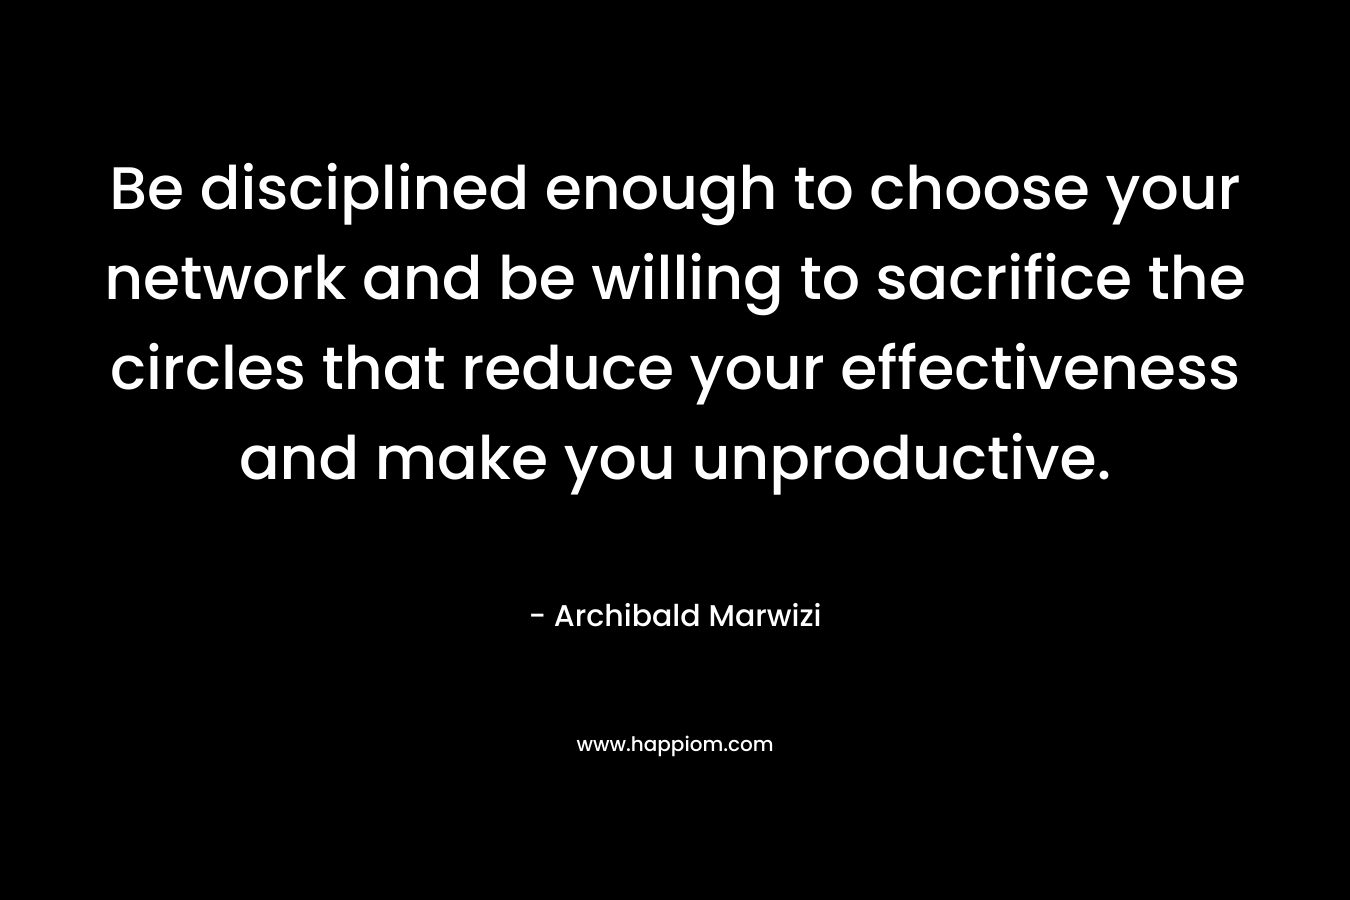 Be disciplined enough to choose your network and be willing to sacrifice the circles that reduce your effectiveness and make you unproductive. – Archibald Marwizi